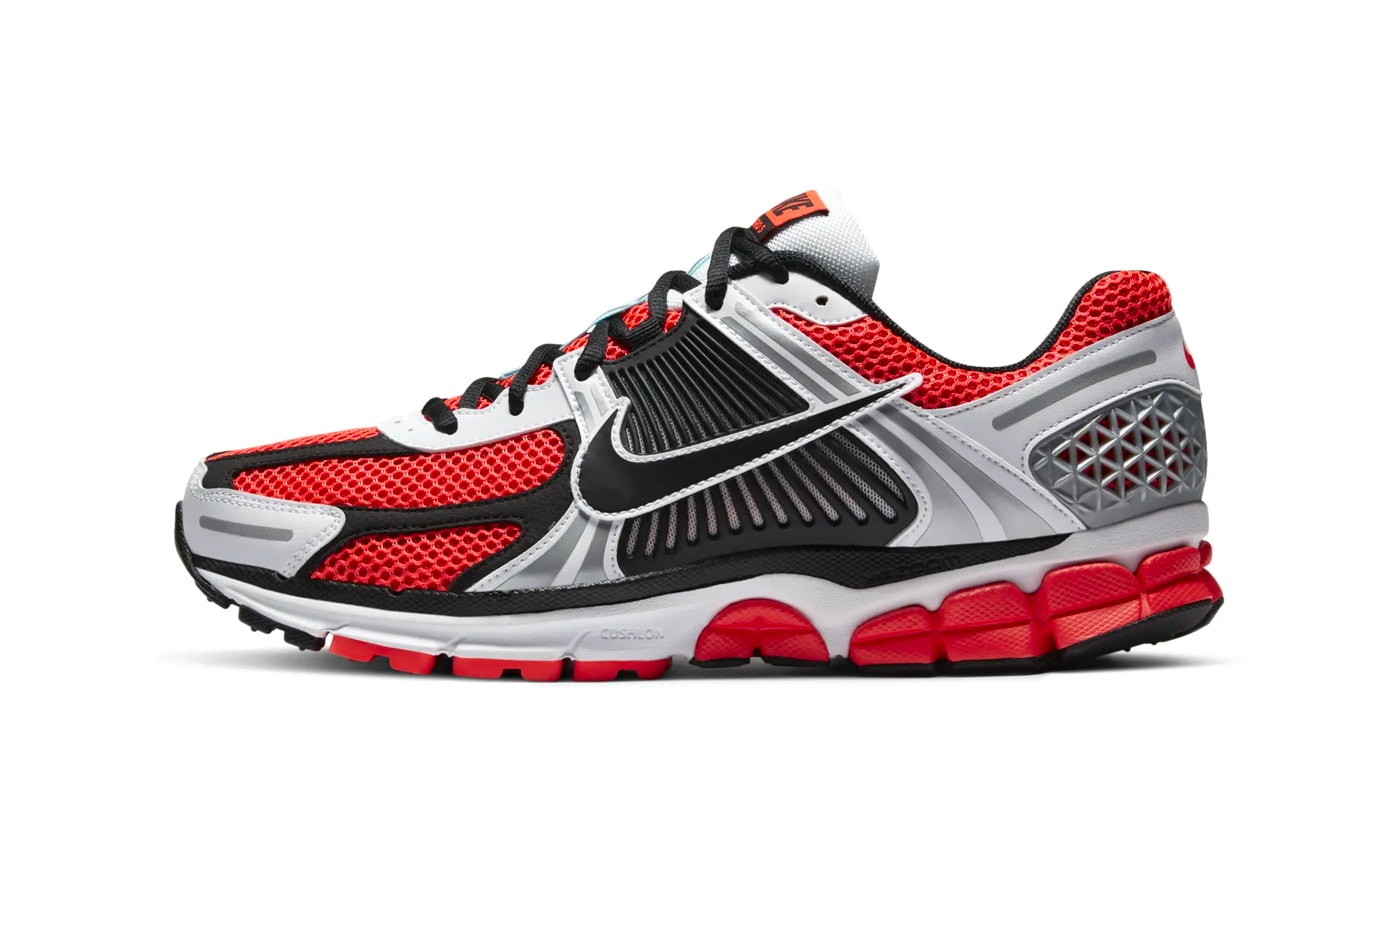 Nike Zoom Vomero SE bright crimson CZ8667 600 menswear streetwear sneaker shoes kicks trainers runners collection spring summer 2020 collection